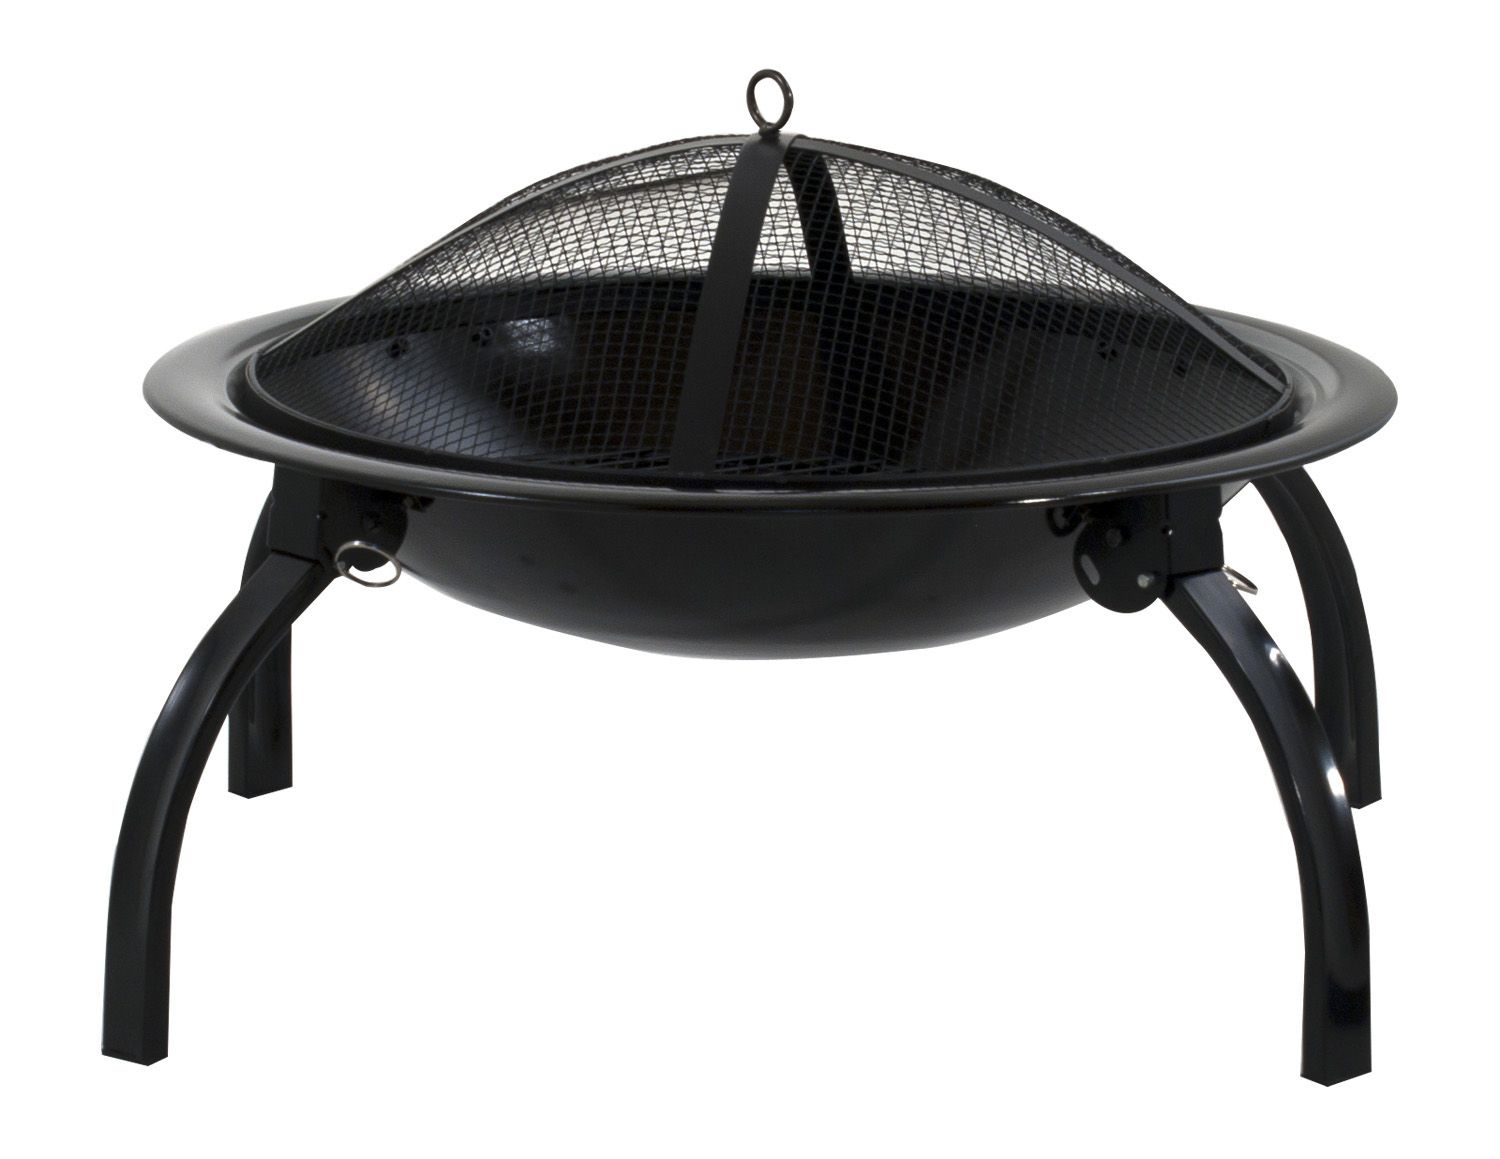 Deckmate Quick Collapse Fire Pit